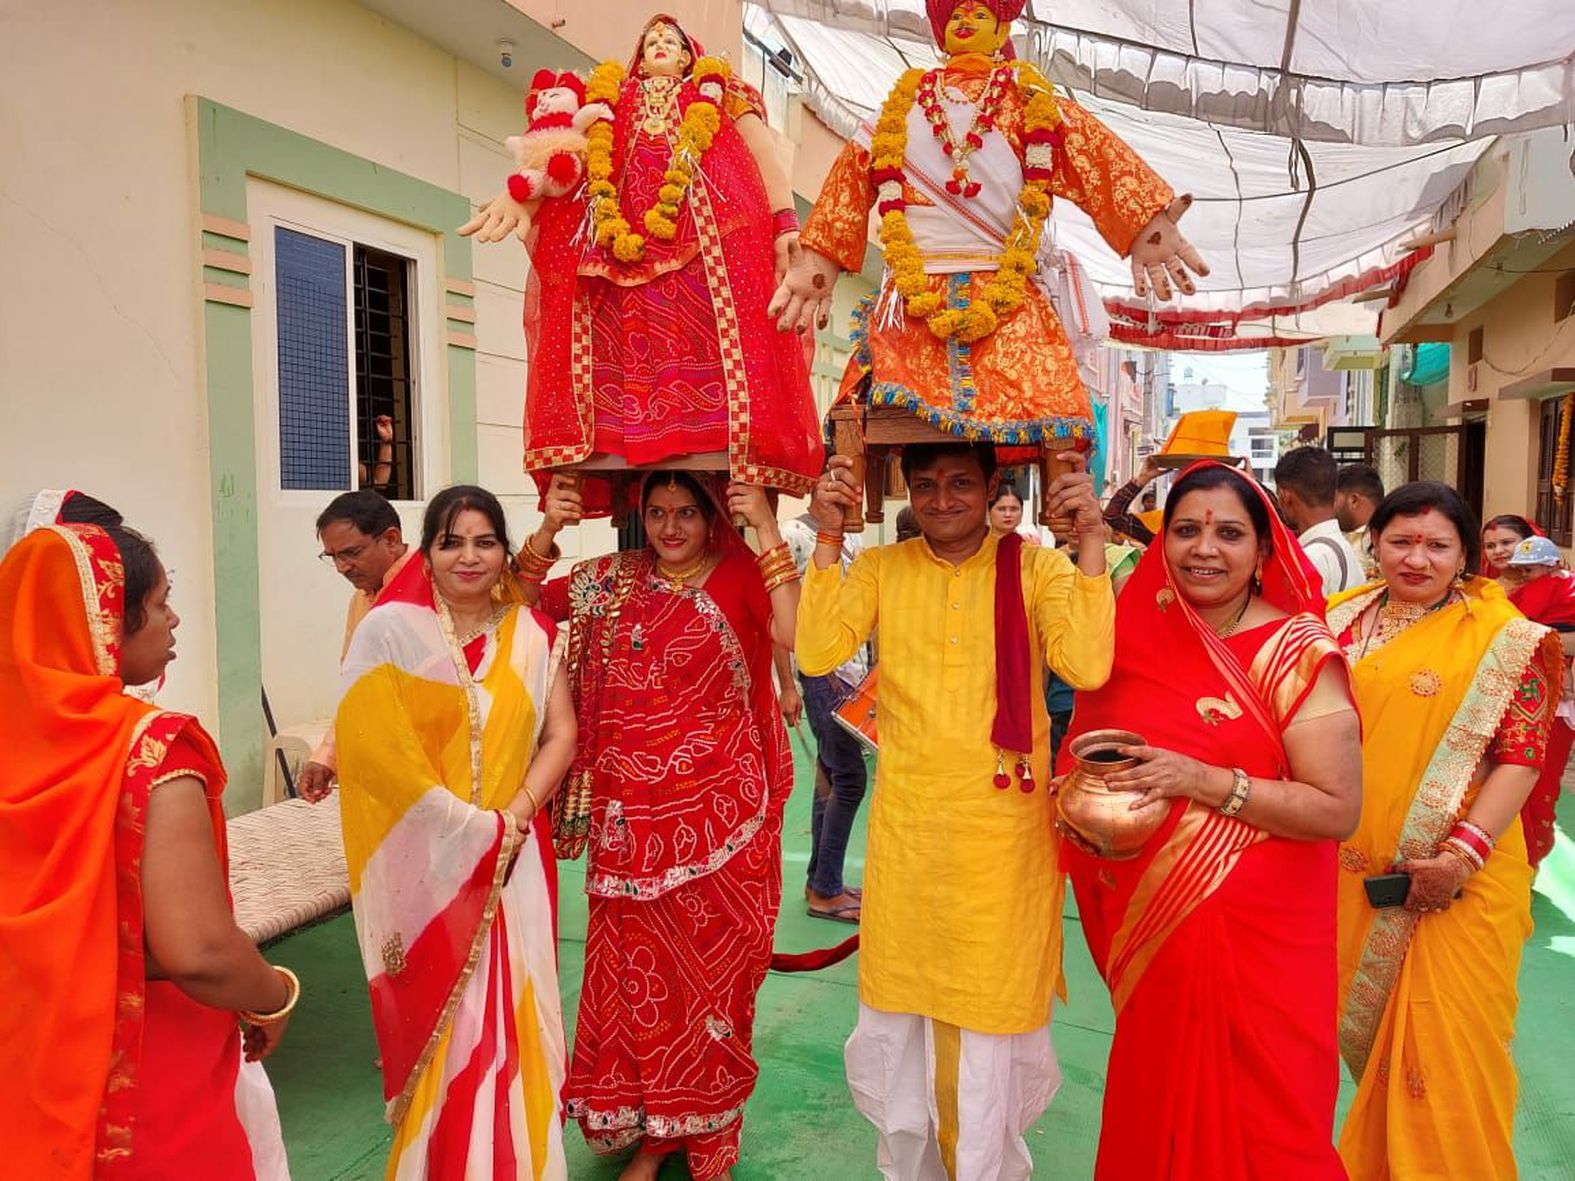 In this way the major Gangaur festival of Nimar celebrated